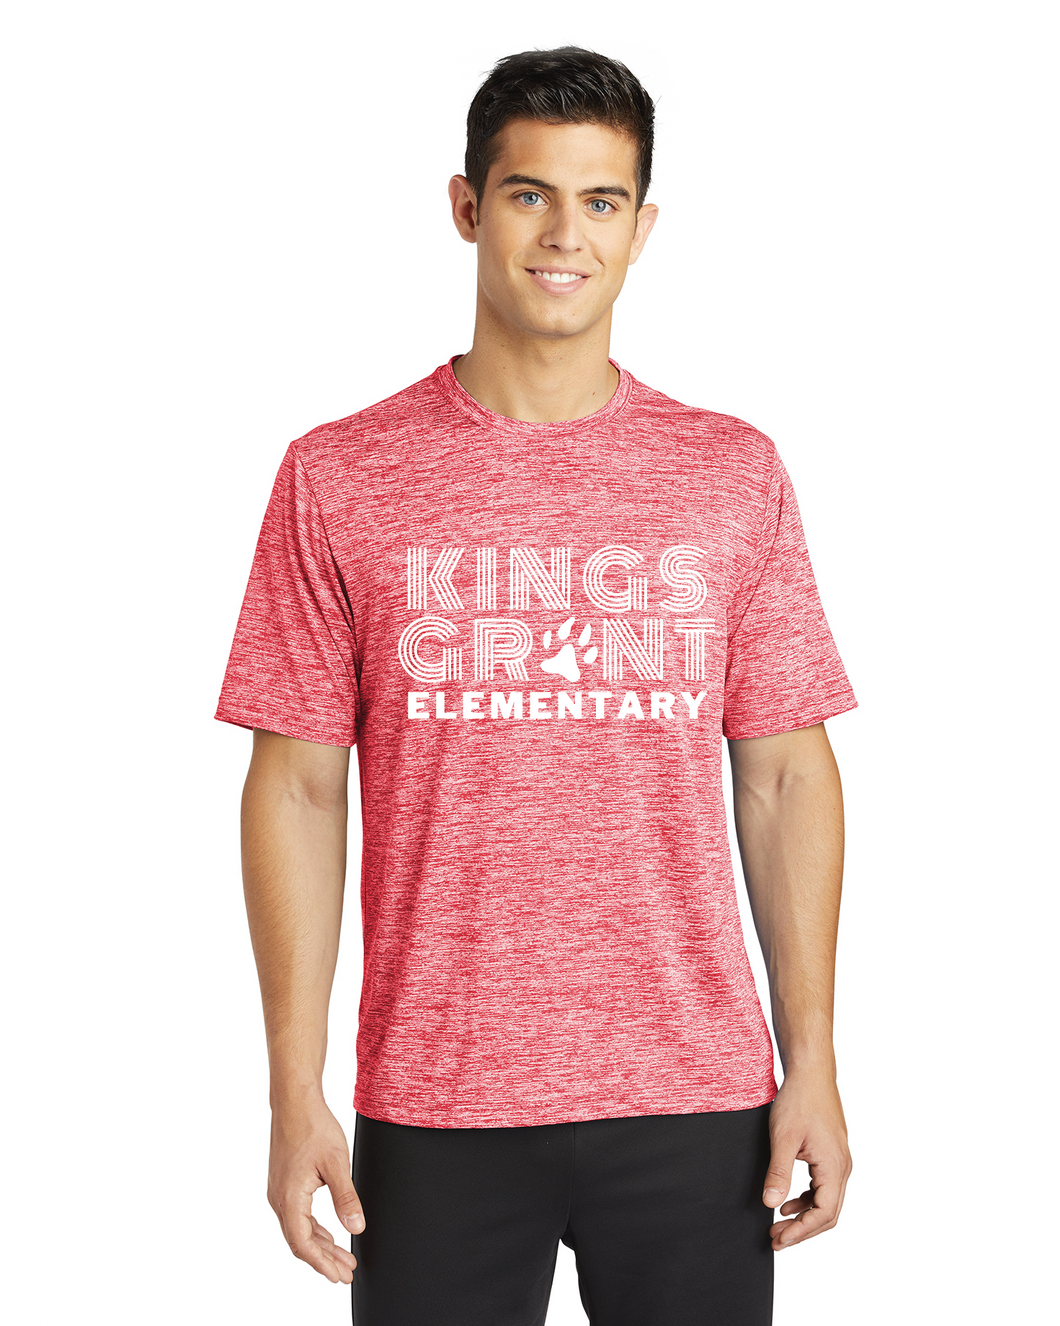 Electric Heather Tee (Youth & Adult) / Red / Kings Grant Elementary